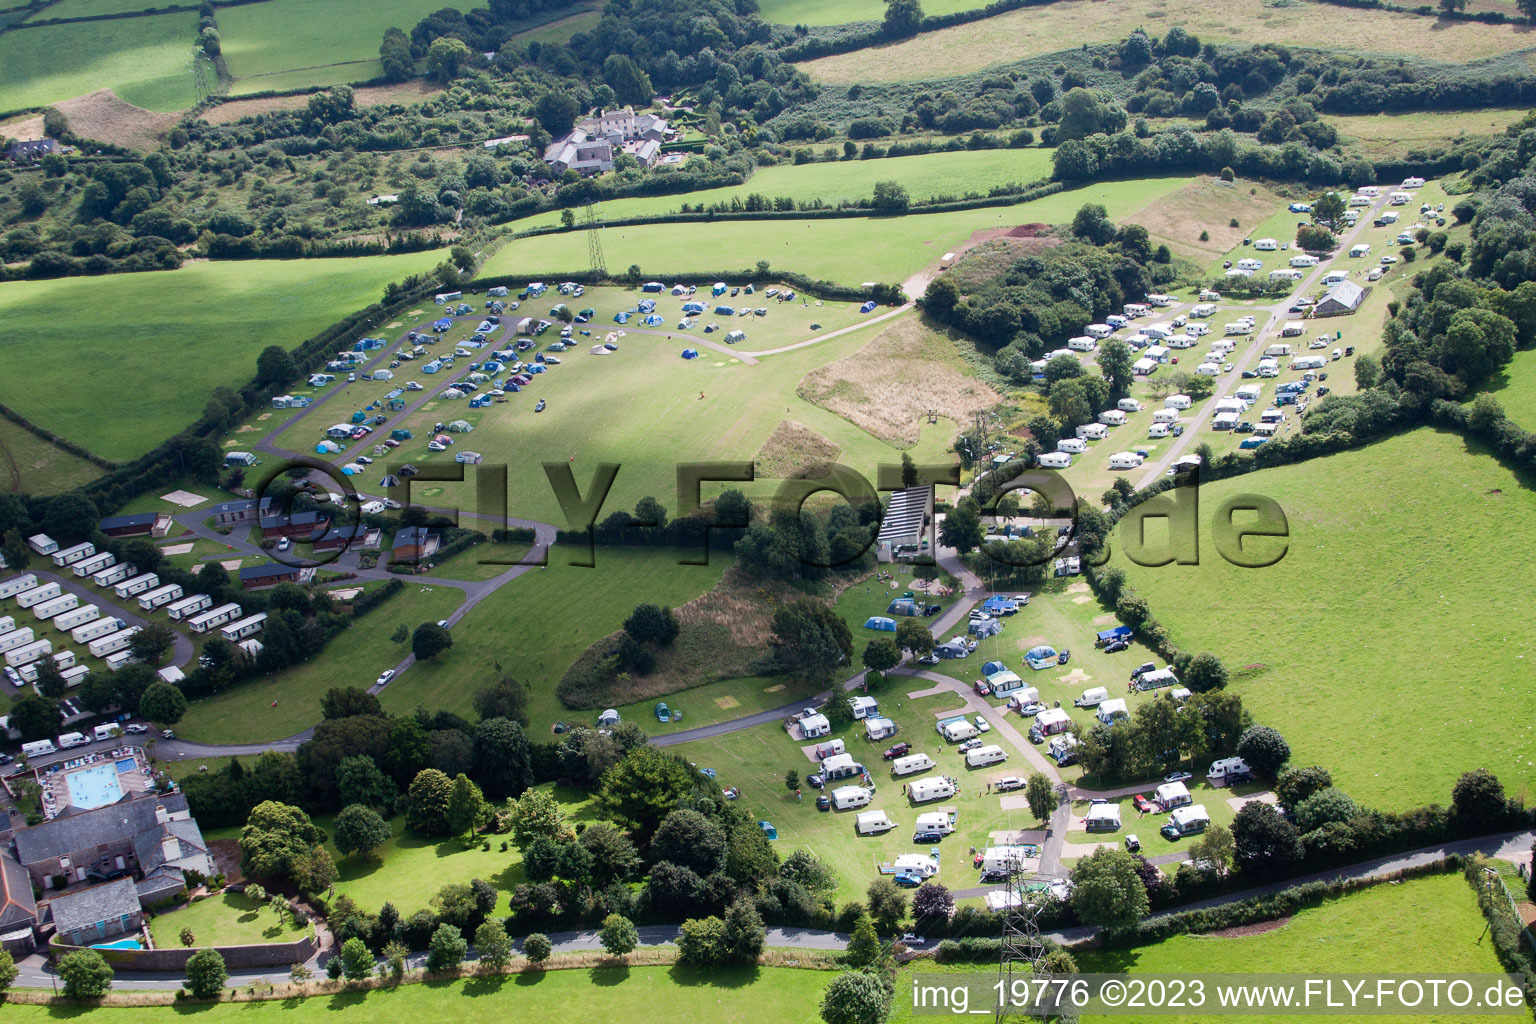 Totnes in the state England, Great Britain from above